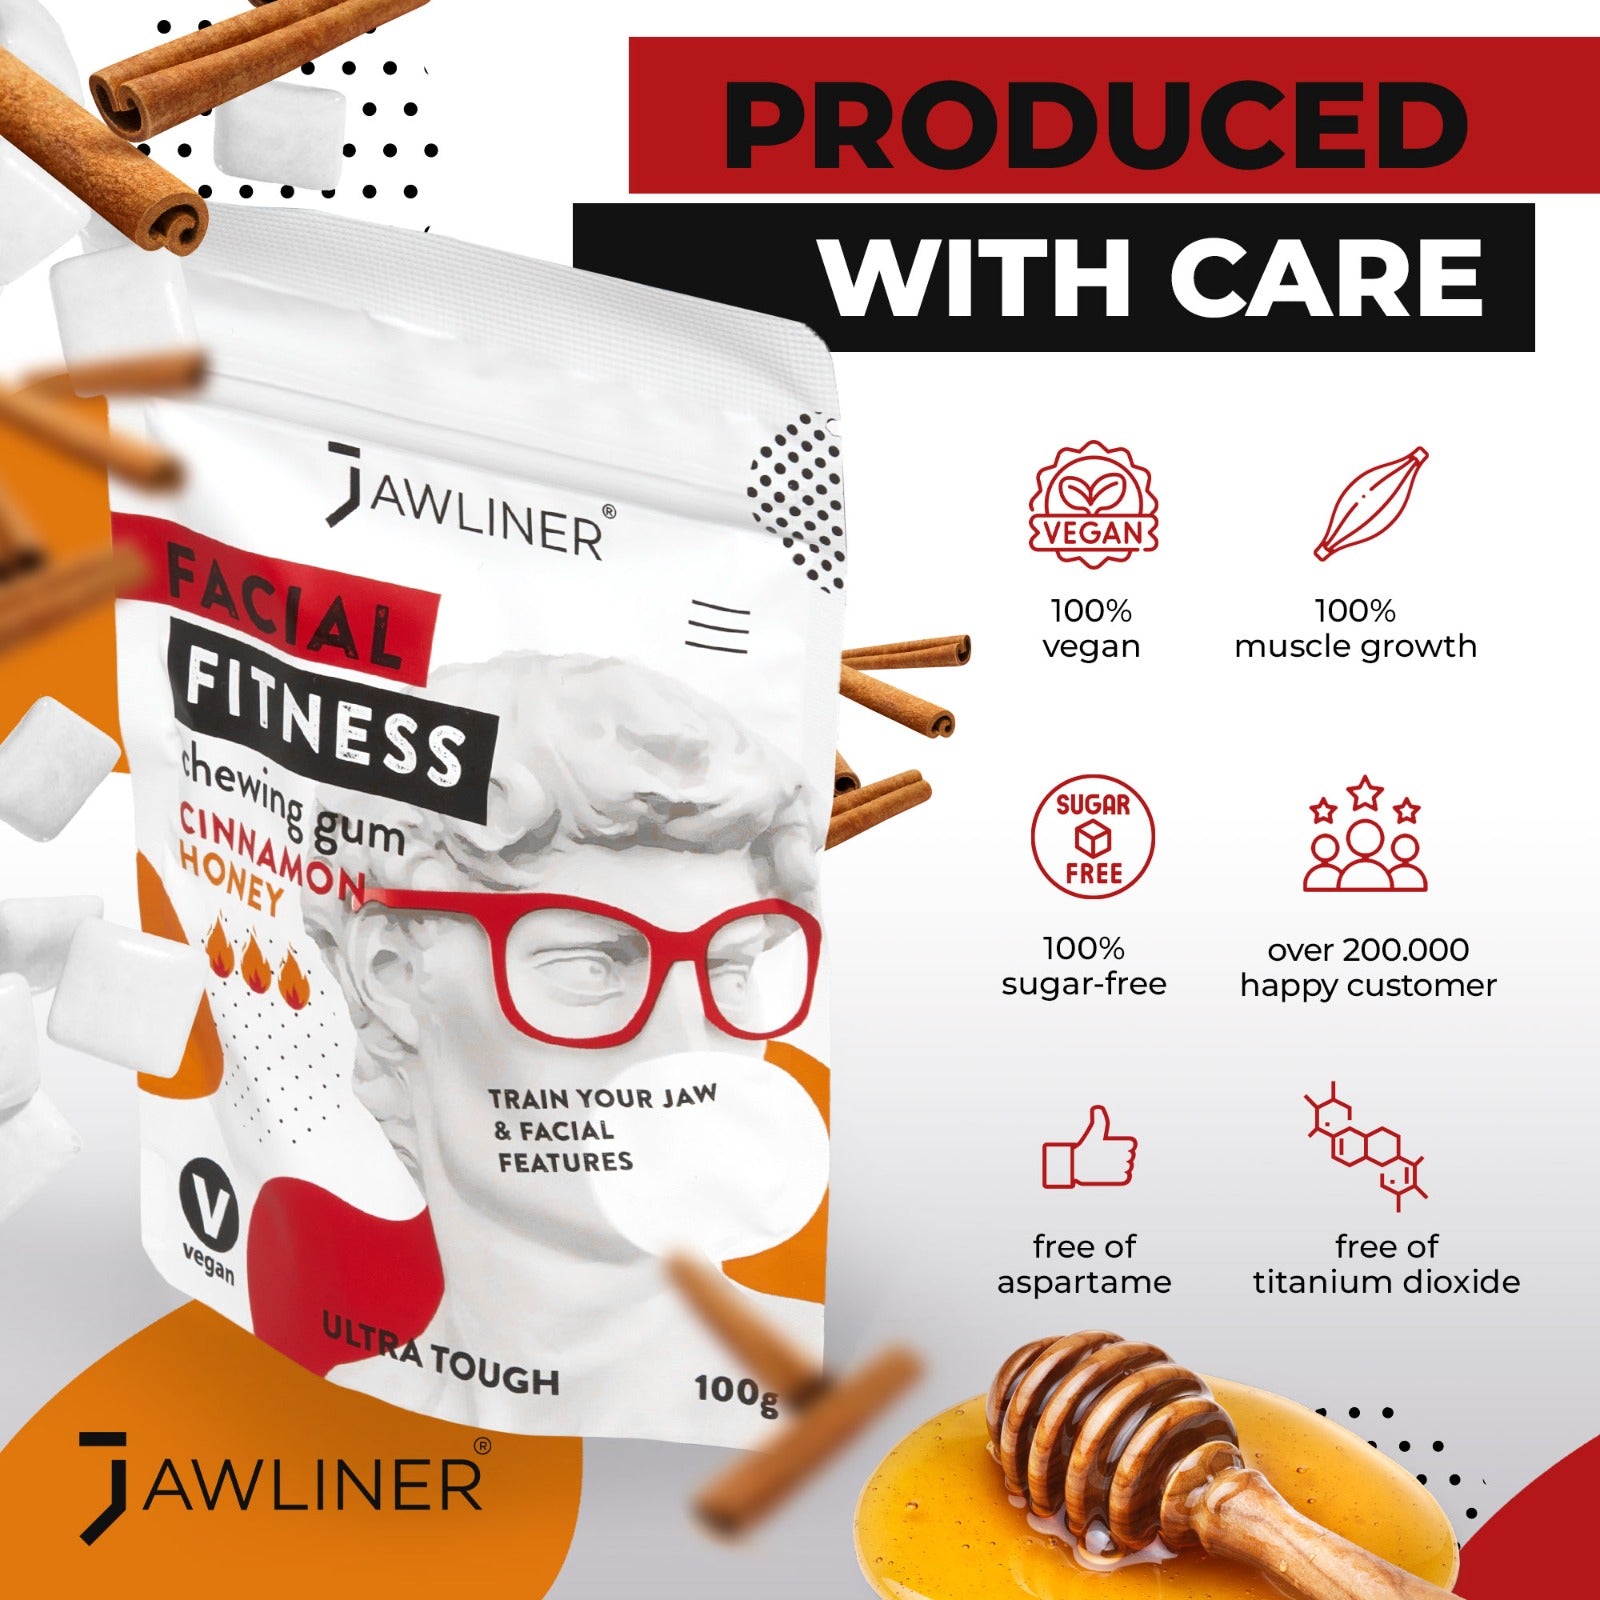 JAWLINER Fitness Chewing Gum (2 months pack) Jawline Gum - Sugar Free Gum -  Cinnamon Honey Gum - Double Chin Reducer - Jawline Exerciser For Mewing